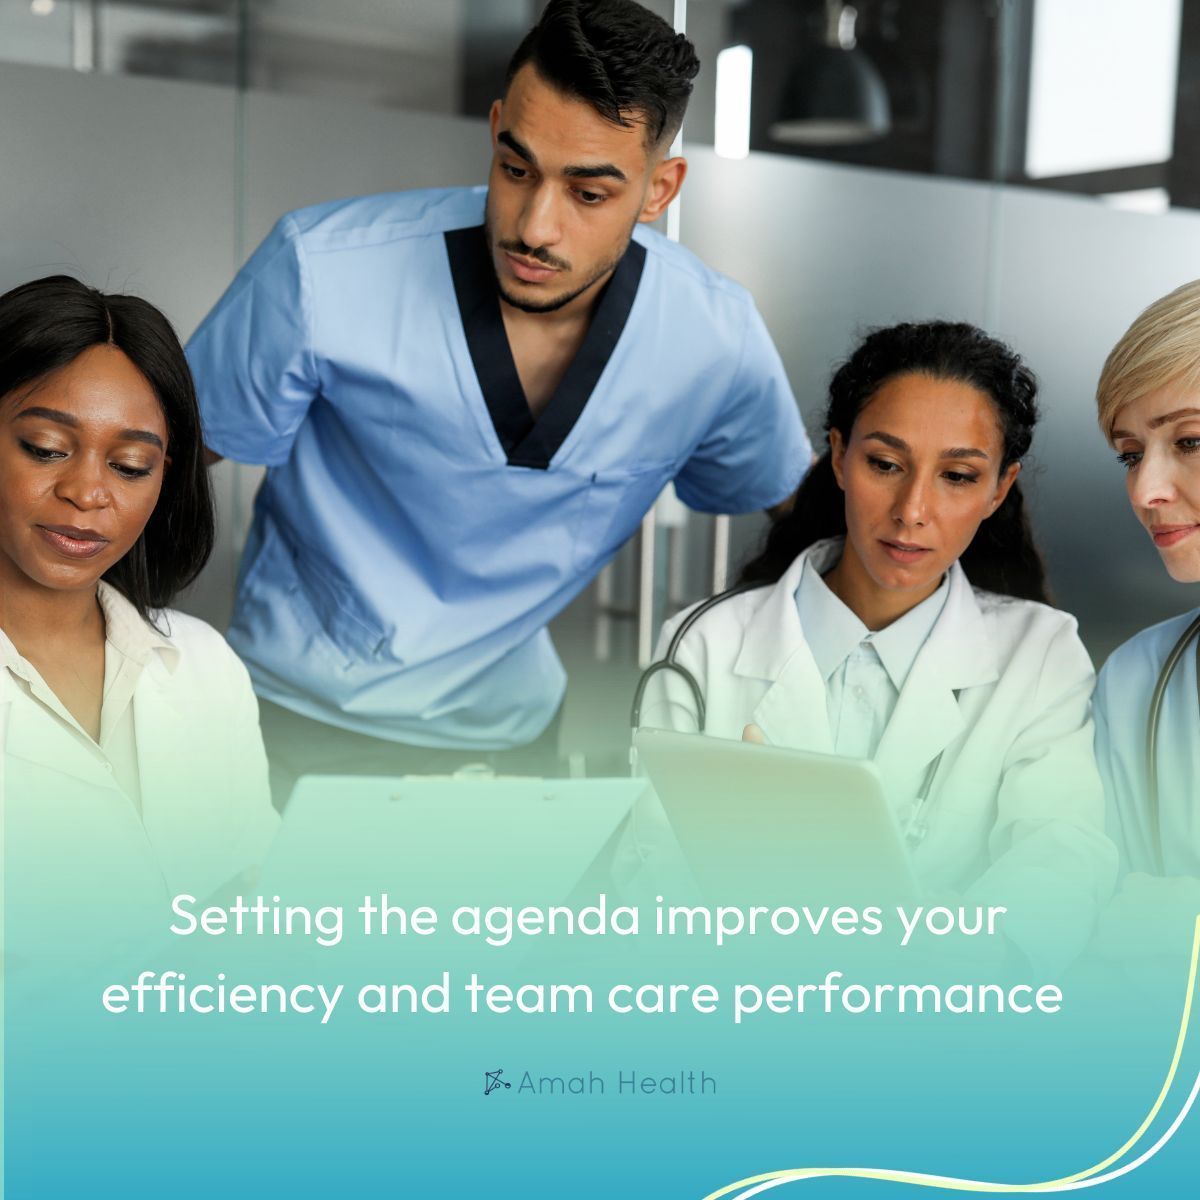 Struggling with healthcare time management? Agenda-setting is the game-changer! Let me share techniques about how it boosts team care performance. #HealthcareEfficiency #TeamCare #AgendaSetting
Schedule a free session to build a more efficient team.  buff.ly/476KEzx